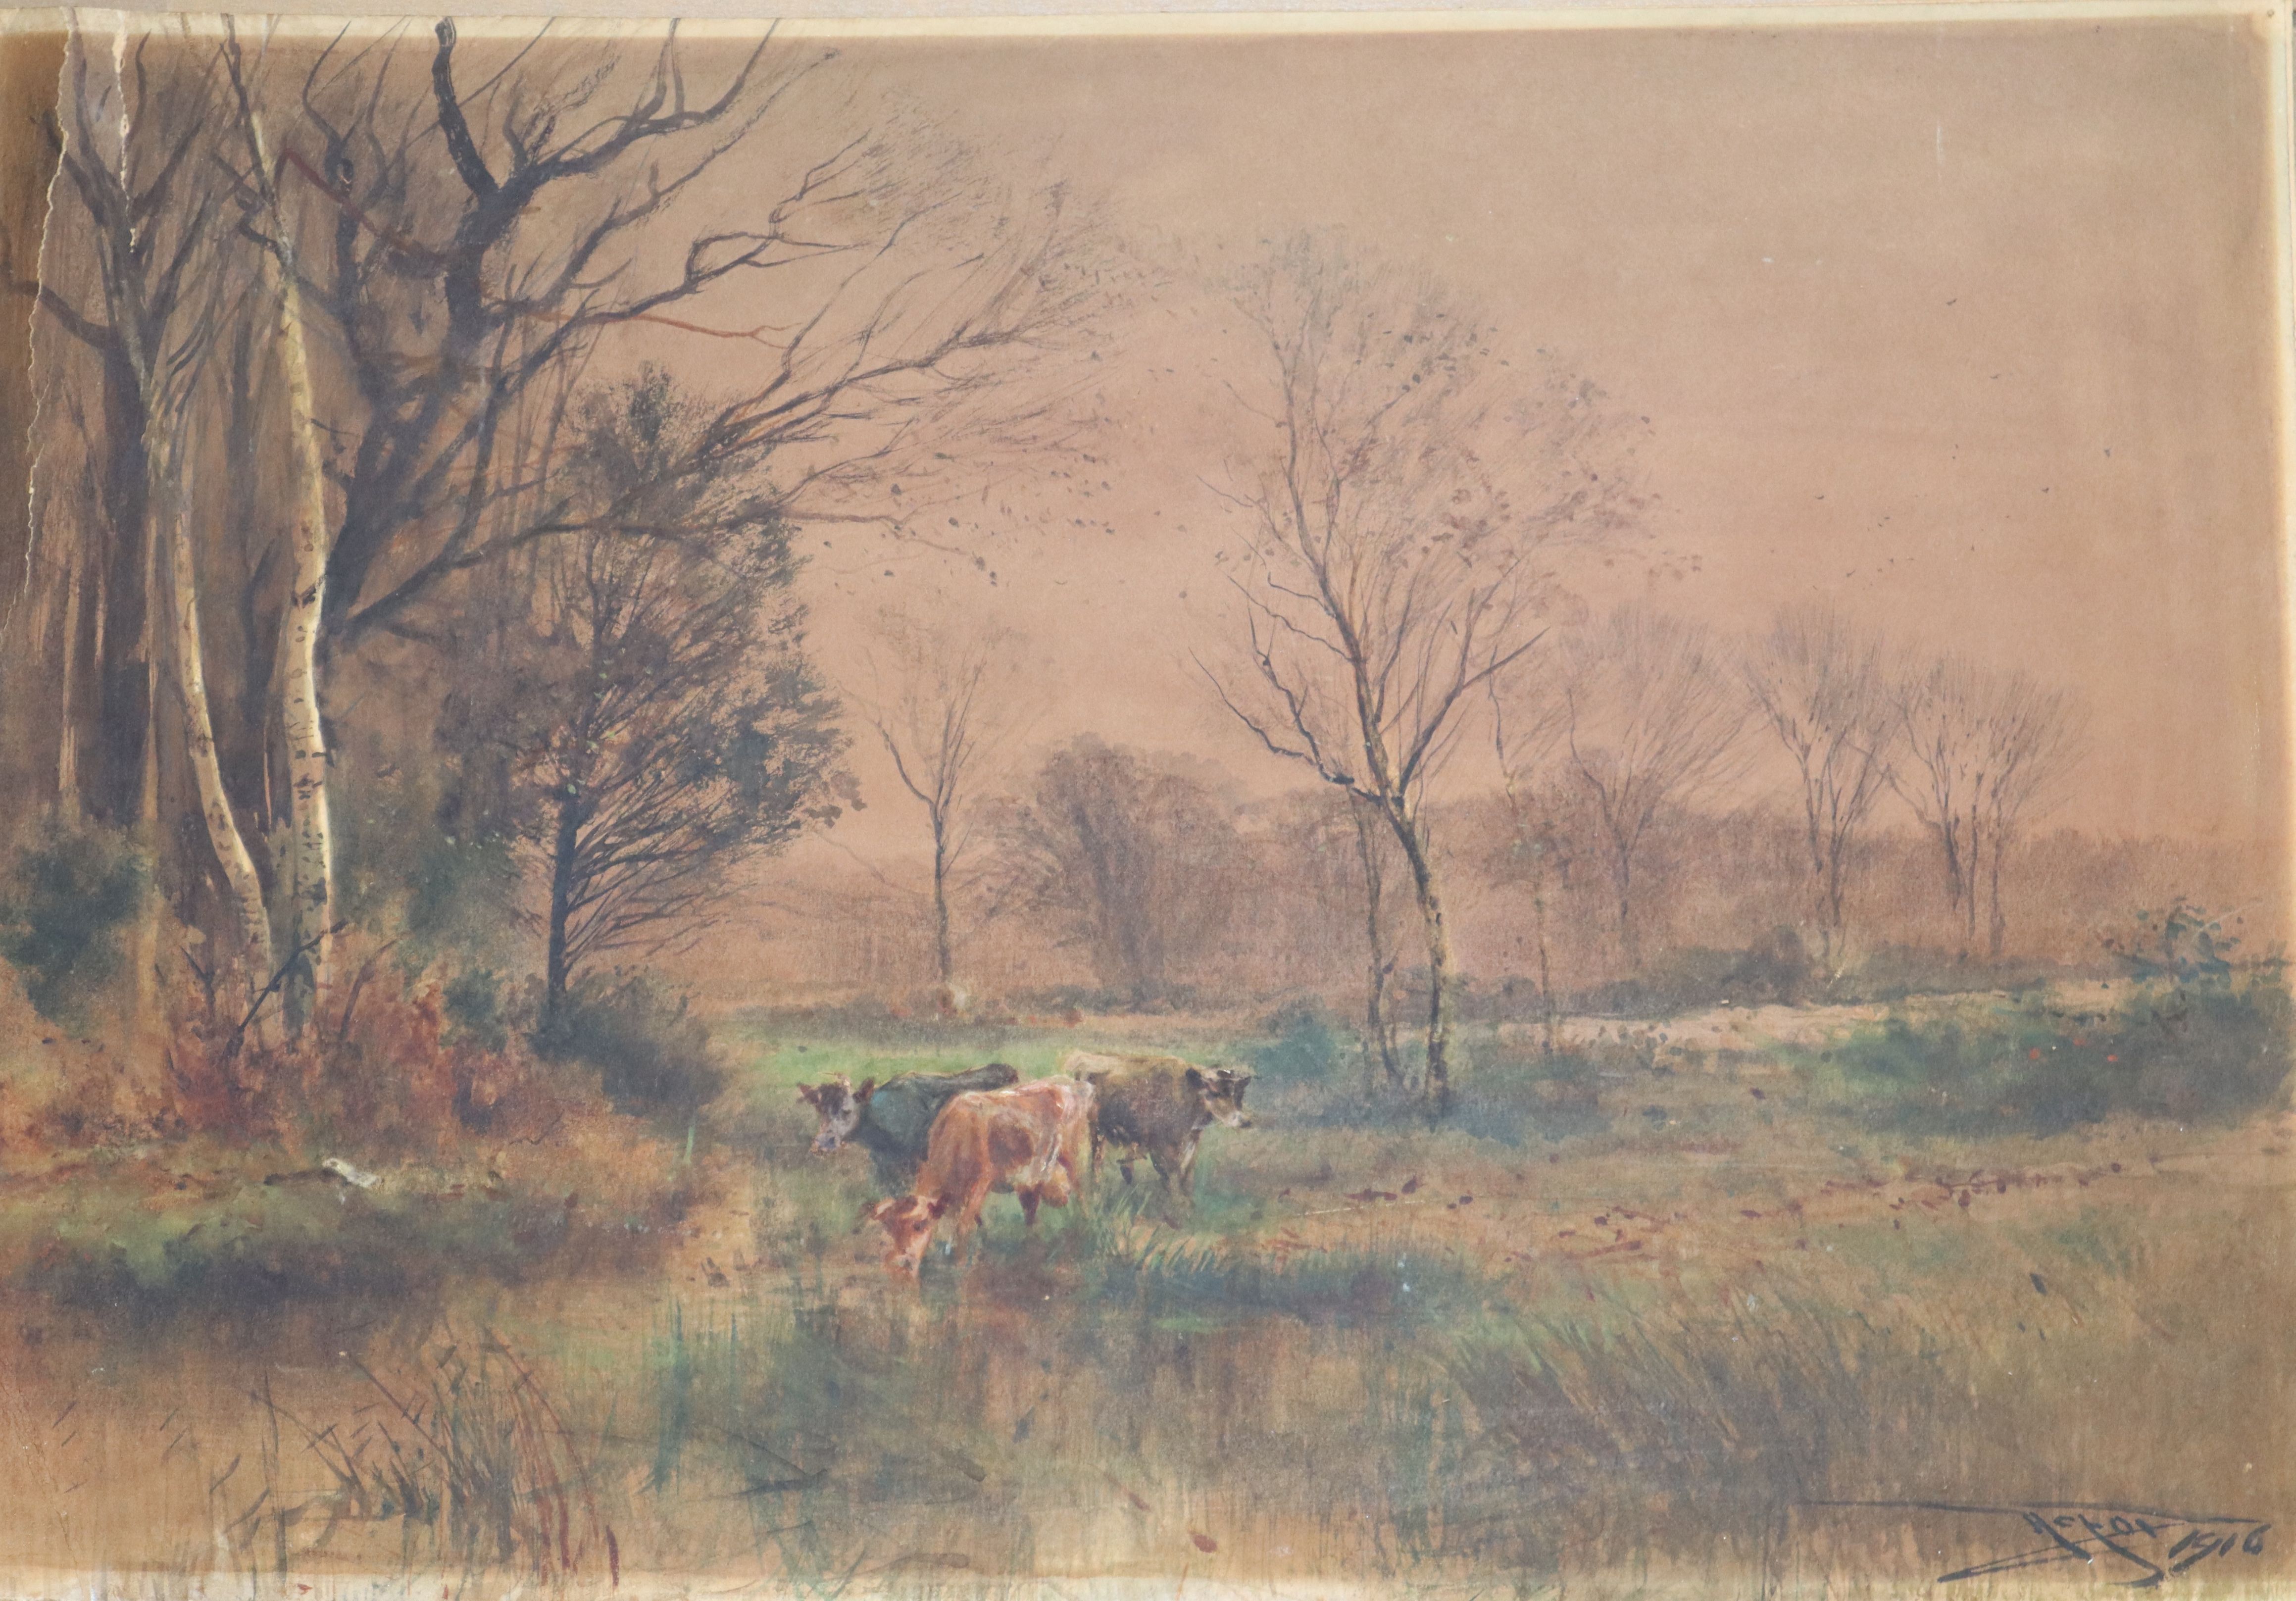 Henry Charles Fox, watercolour, Cattle watering, signed and dated 1916, 38 x 56cm, unframed